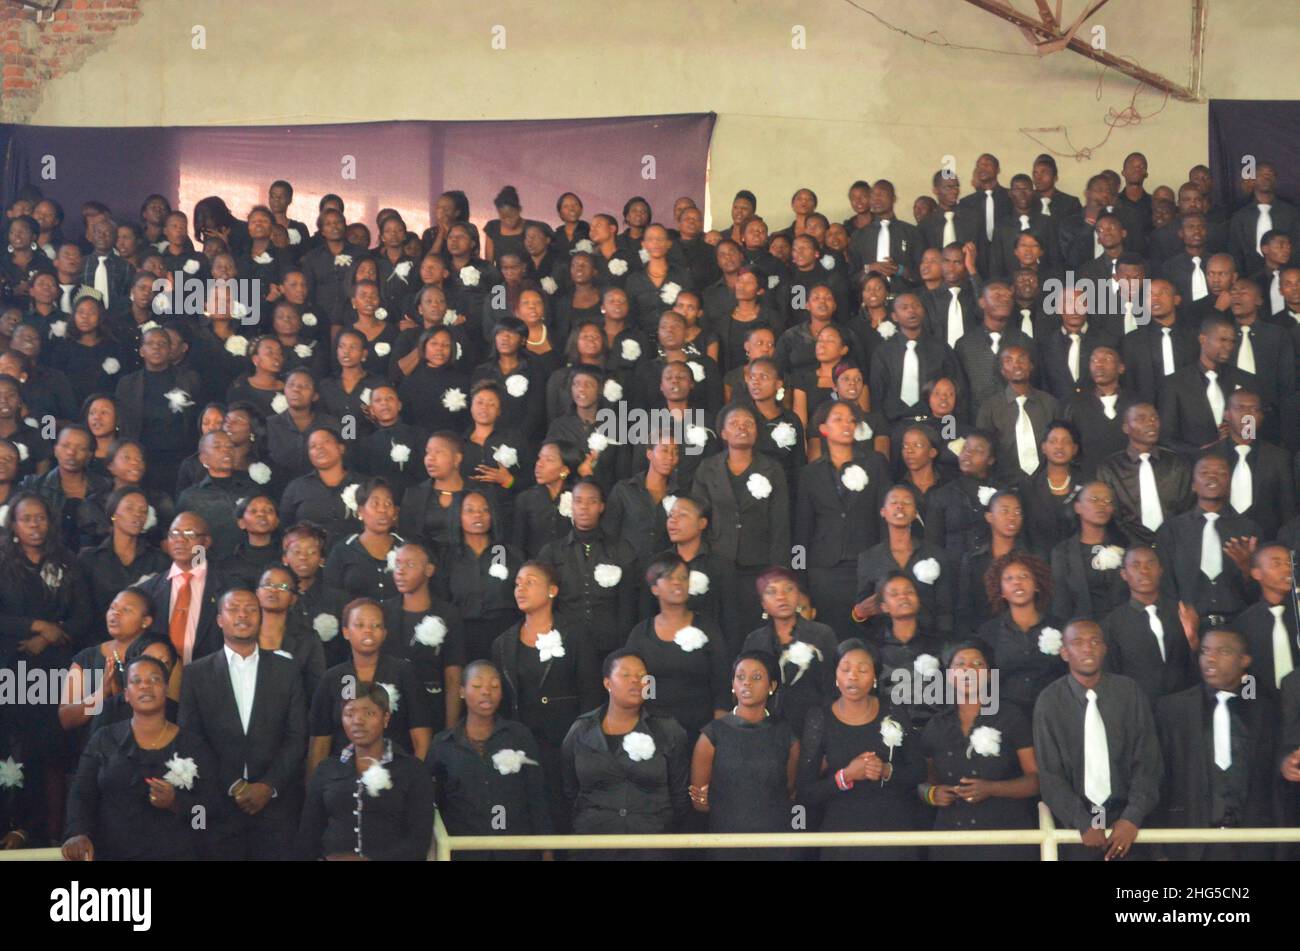 United Family International Church choir singing in church. The church is one of many mega prophetic churches that have sprung up over the years. Zimbabwe. Stock Photo